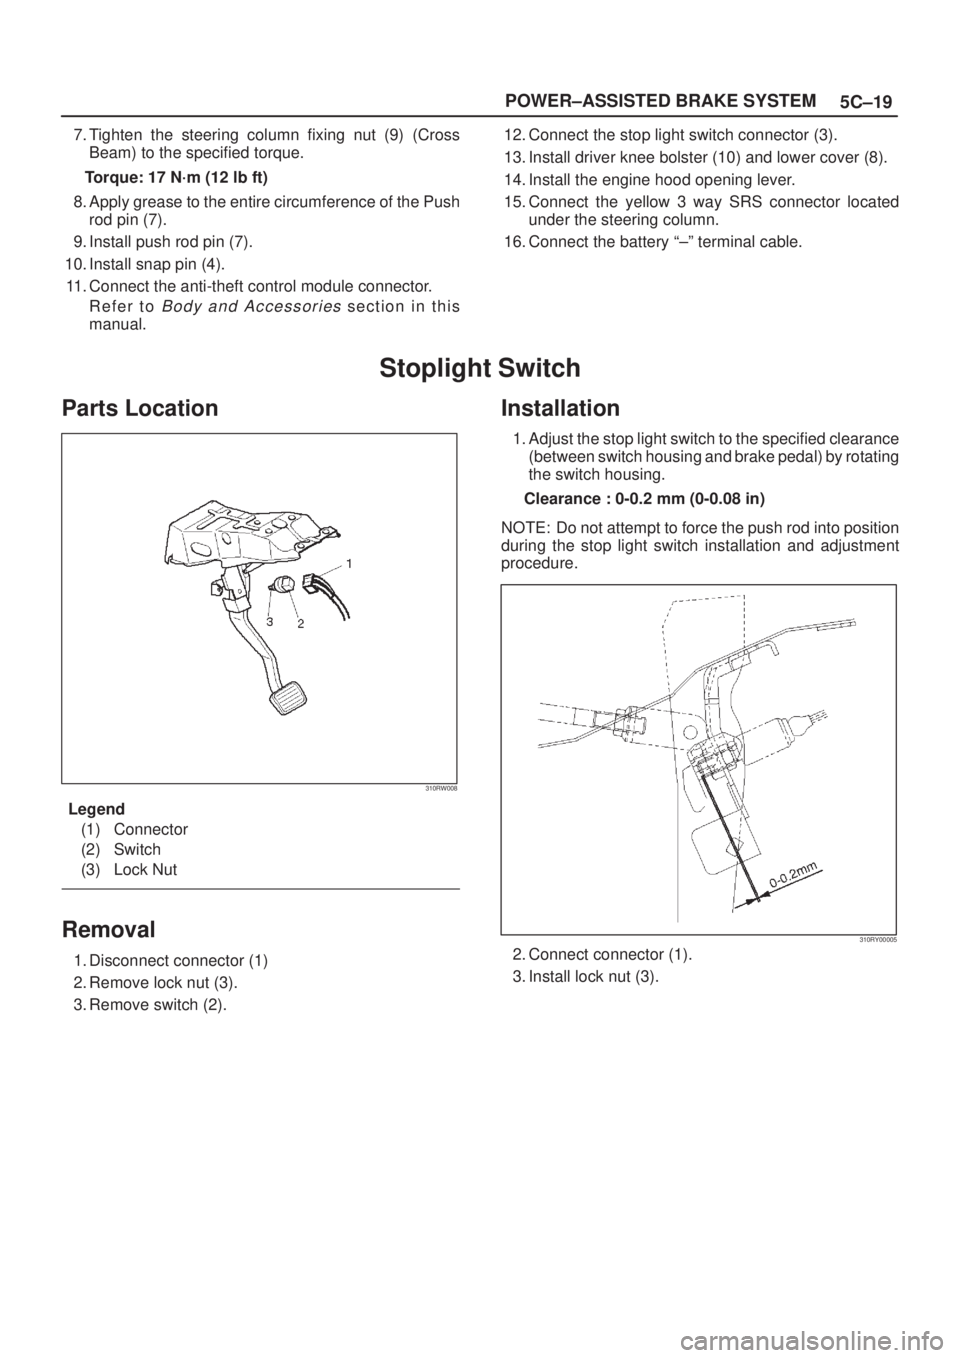 ISUZU AXIOM 2002  Service Repair Manual 5C±19 POWER±ASSISTED BRAKE SYSTEM
7. Tighten the steering column fixing nut (9) (Cross
Beam) to the specified torque.
Torque: 17 N´m (12 lb ft)
8. Apply grease to the entire circumference of the Pu